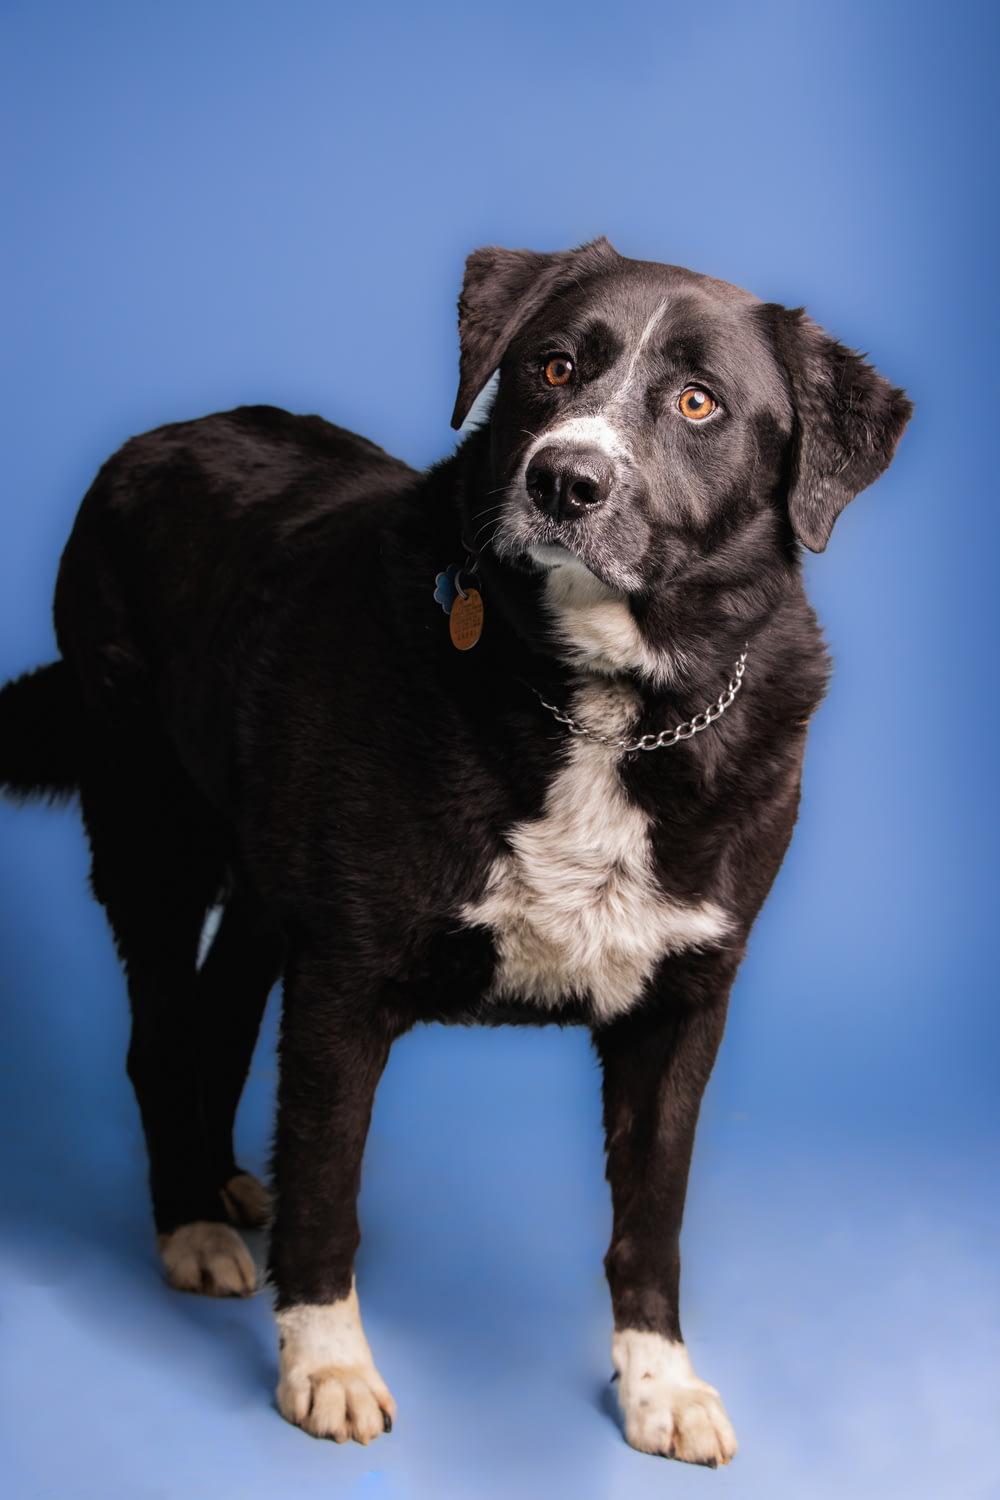 a black and white dog standing on a blue background